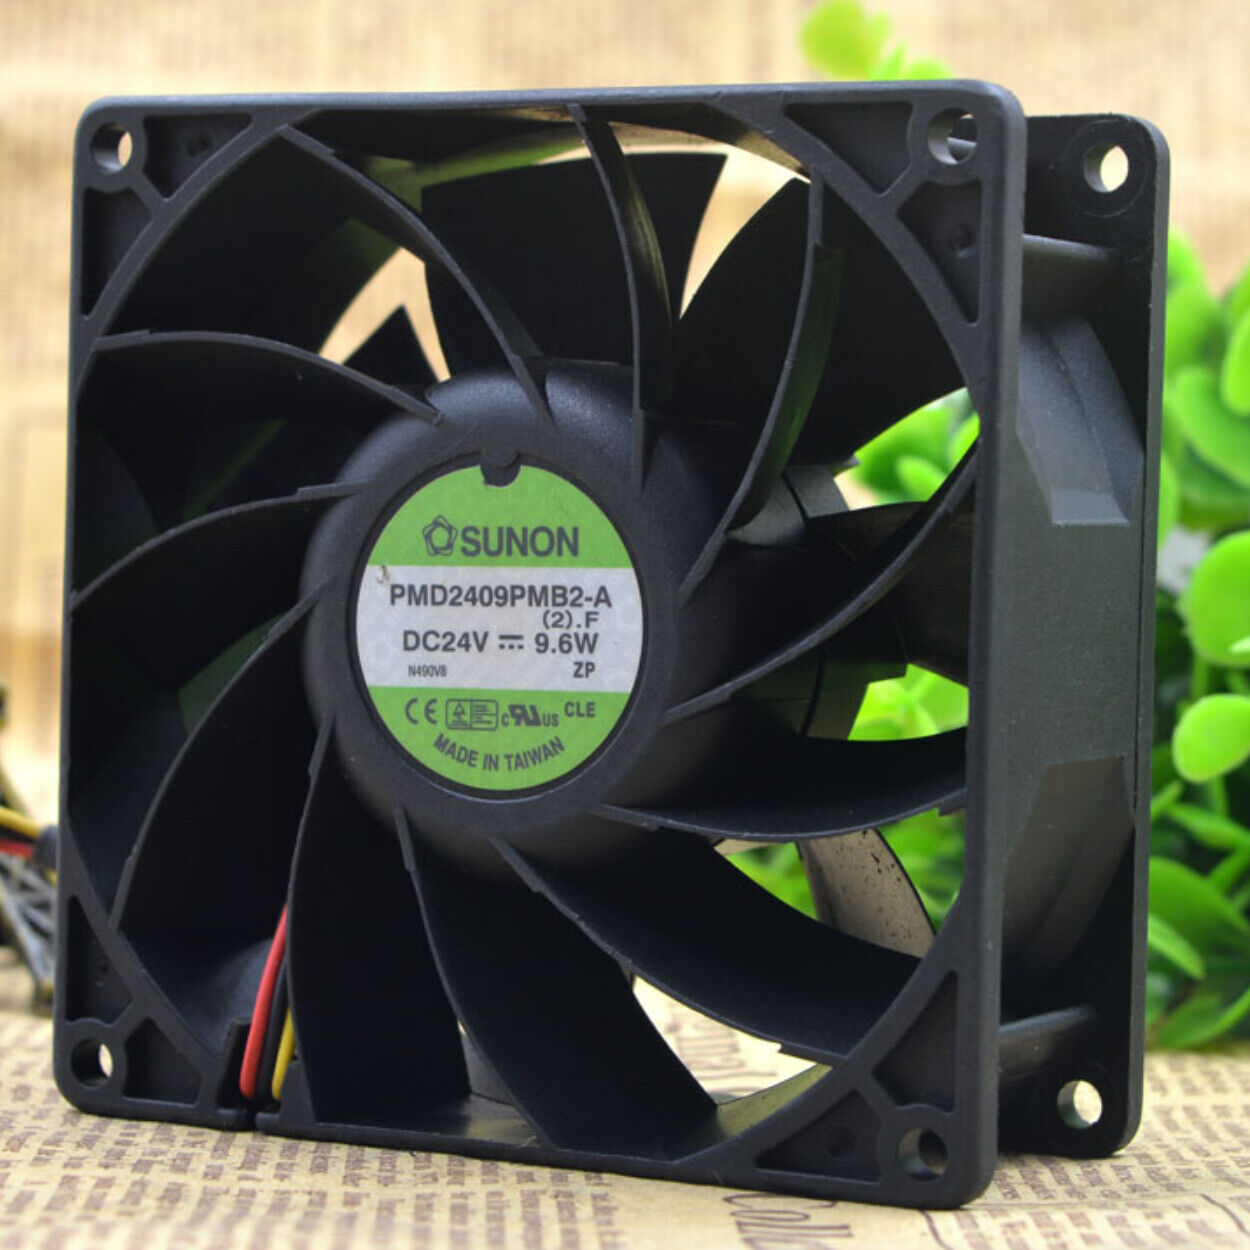 SUNON PMD2409PMB2-A 9038 24V 9.6W 3-wire Inverter Cooling Fan